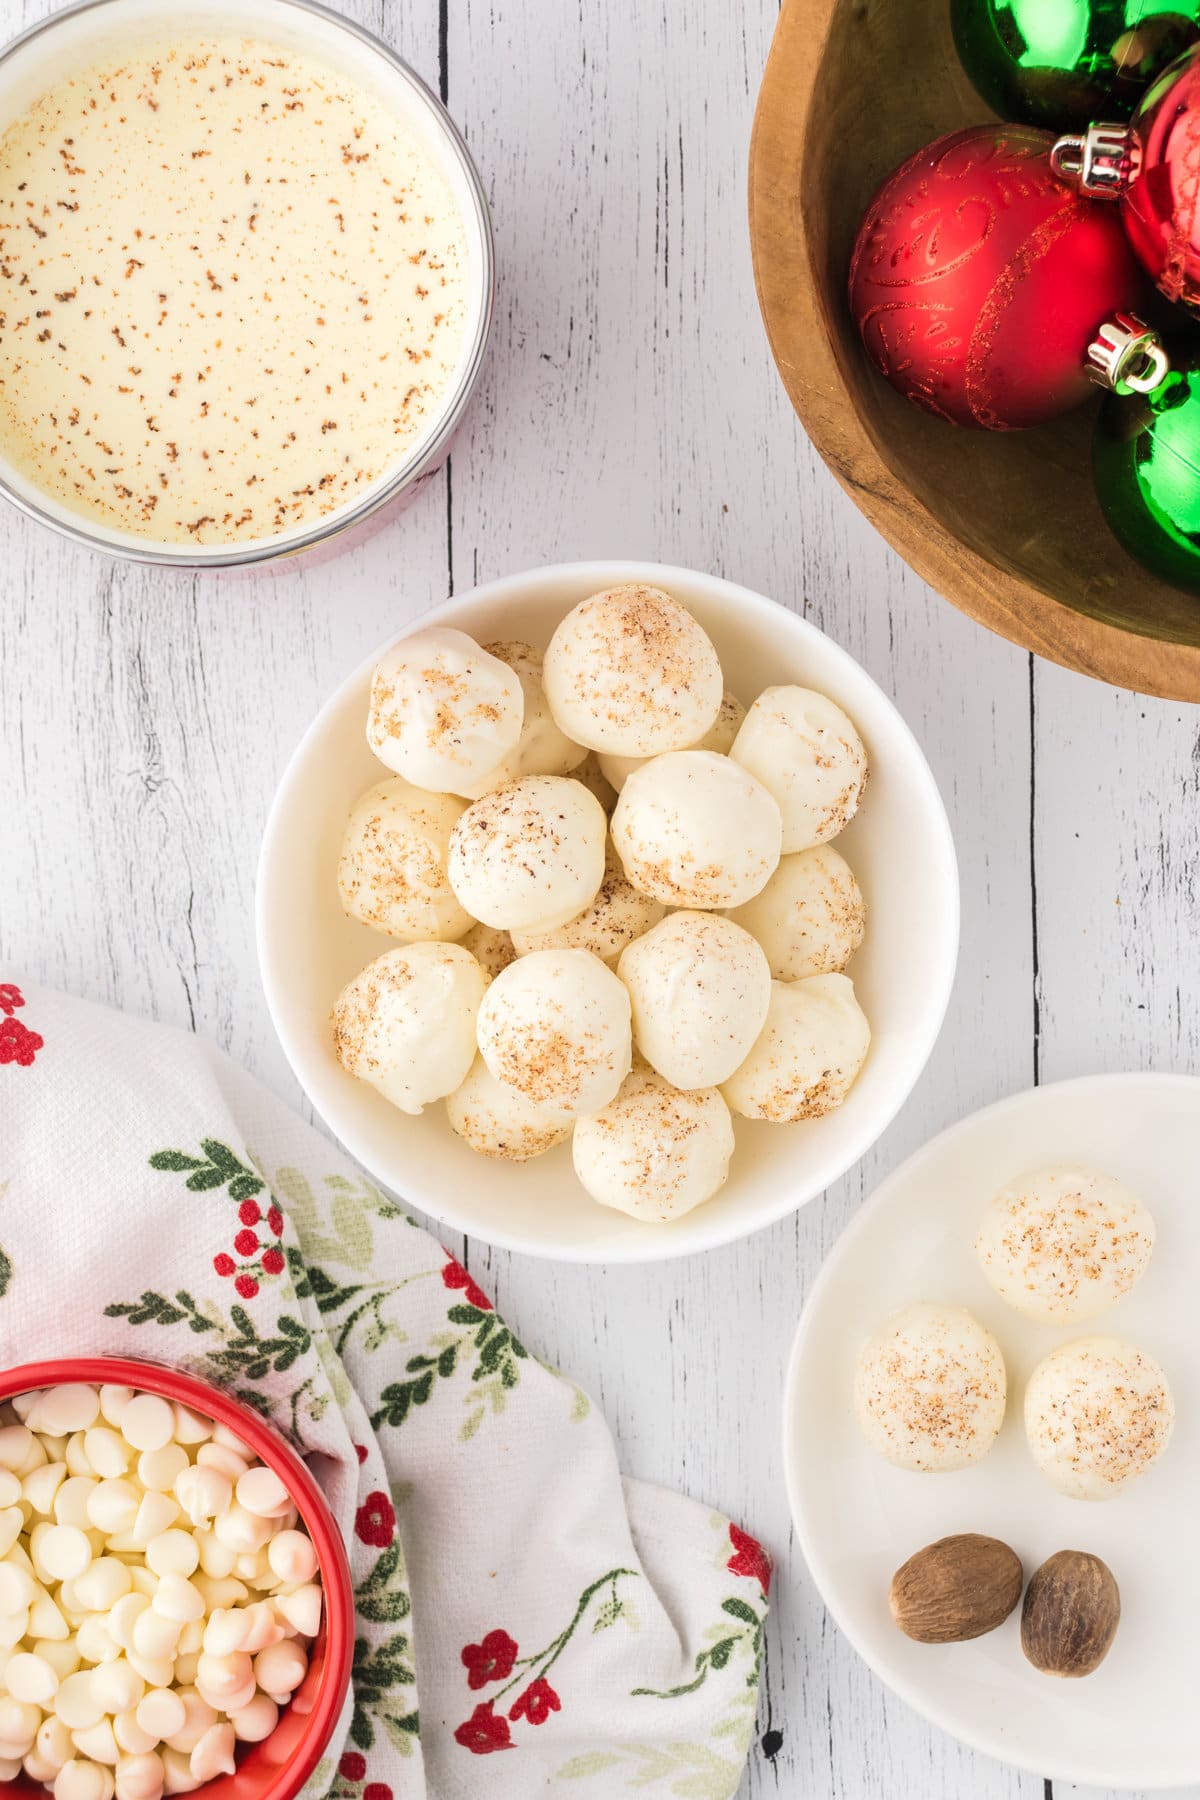 Eggnog truffles, sprinkled with nutmeg, in a white bowl. There are white chocolate chips, whole nutmegs, eggnog, and Christmas ornaments around the border.